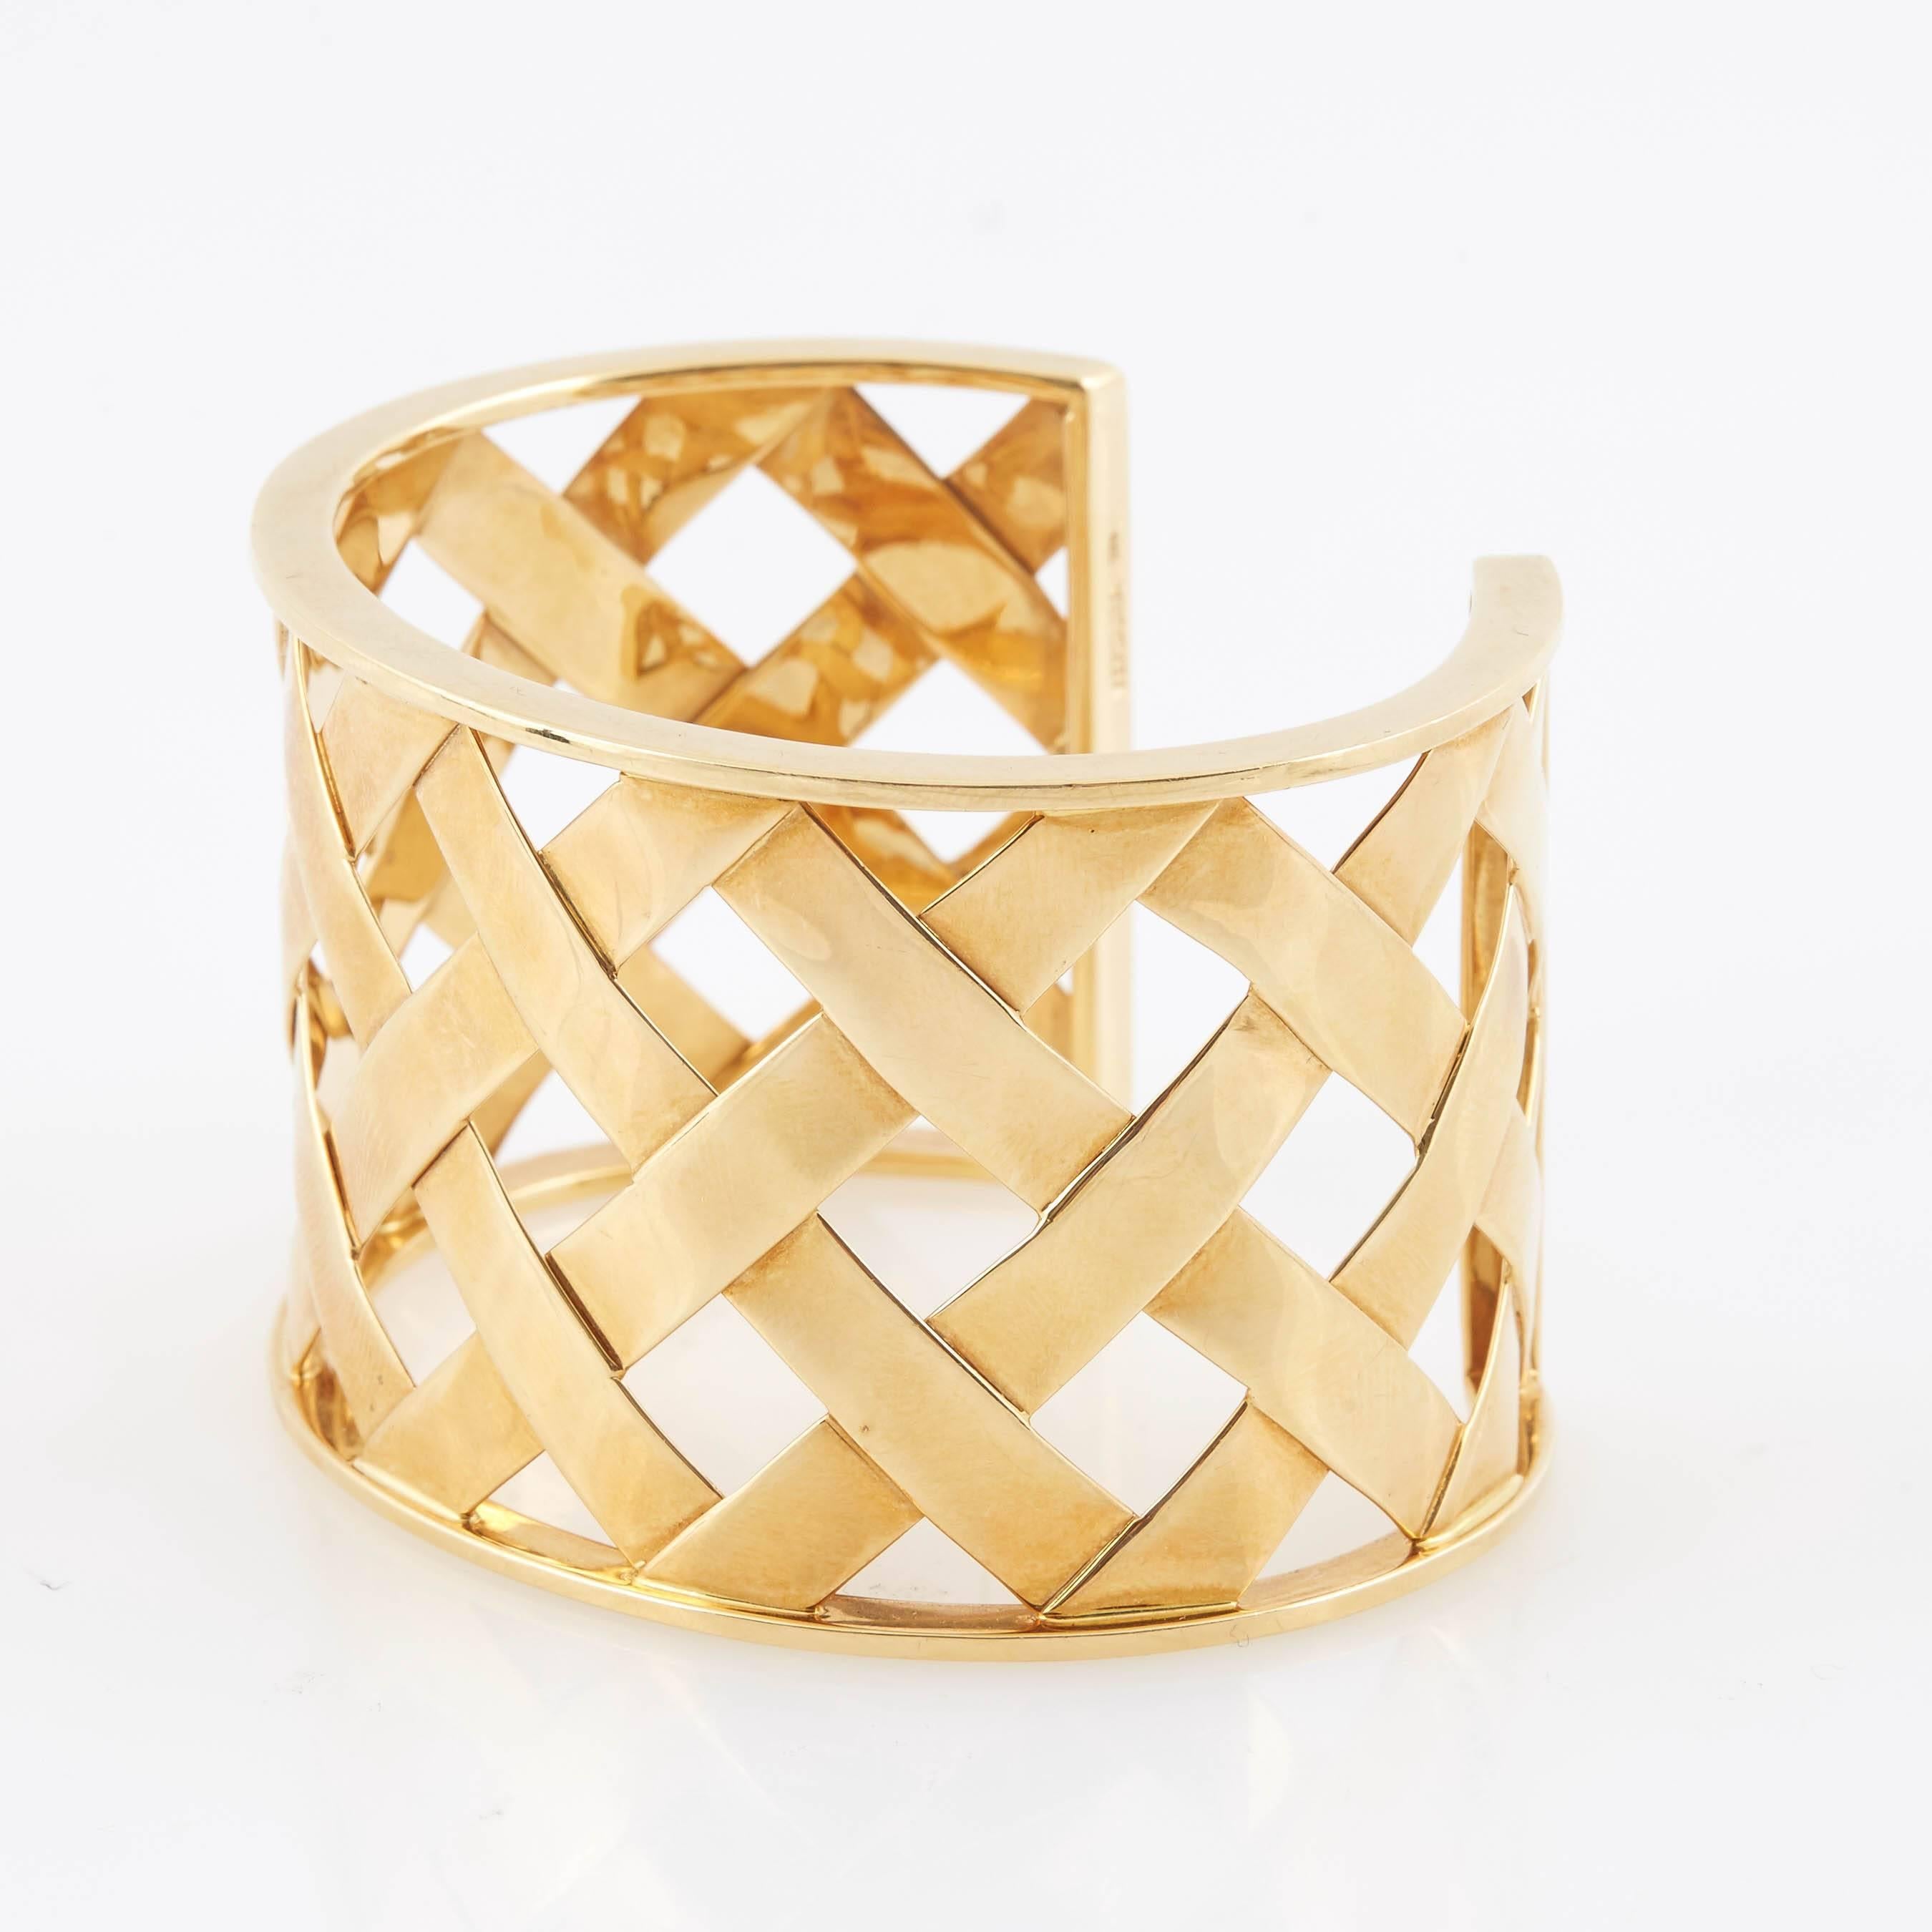 Beautiful Criss Cross cuff bracelet, in high-polished 18k rose gold. Slip-on style. Designed by Verdura. 